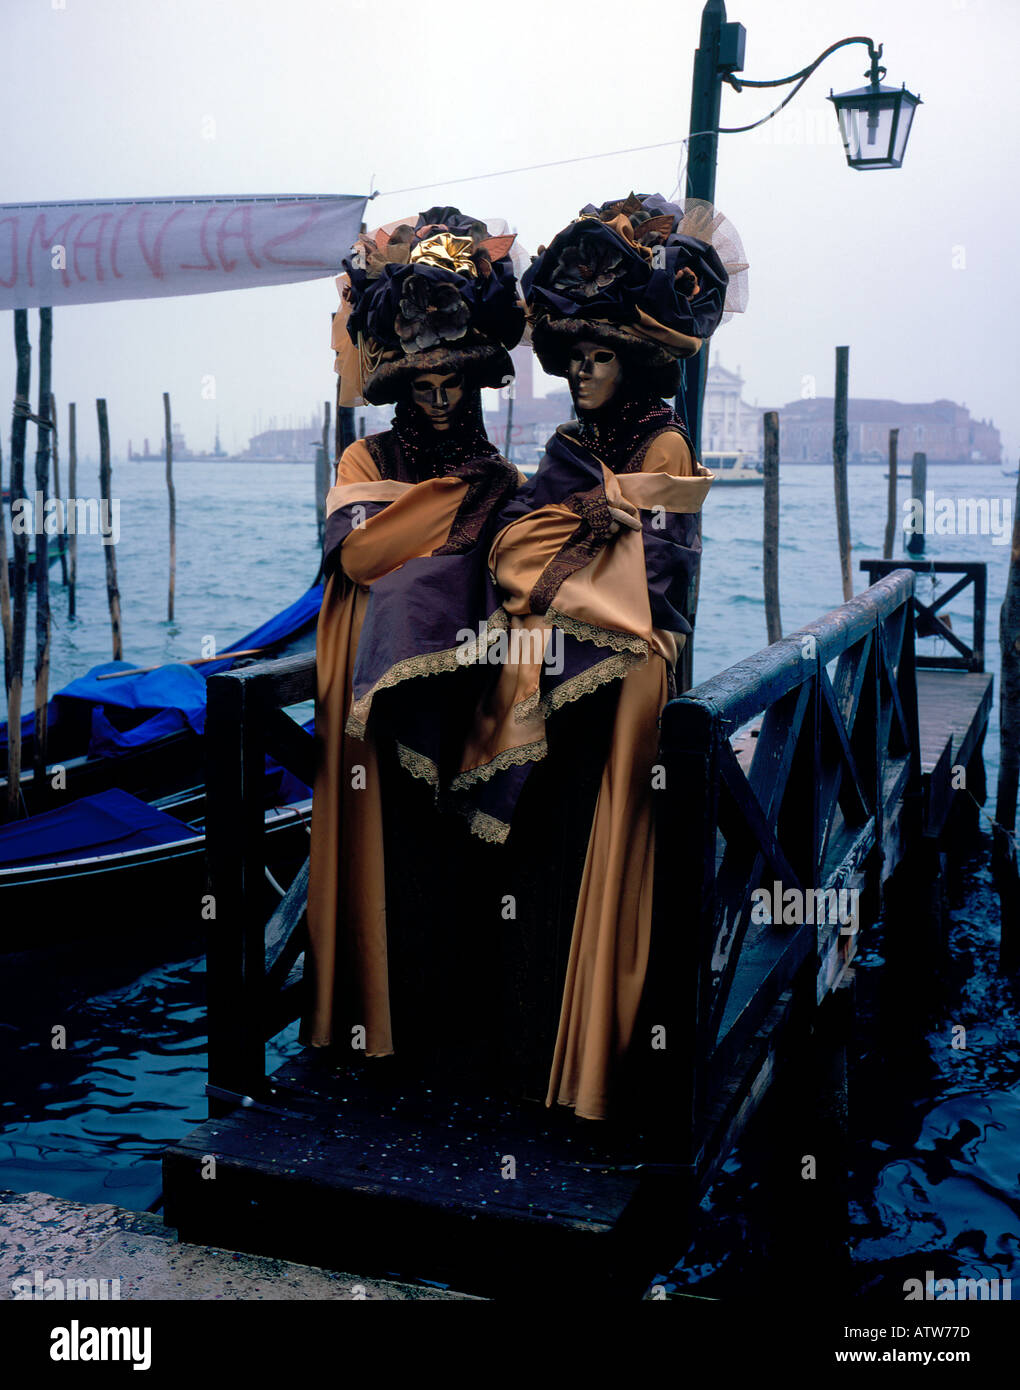 Carnival Masks at Venice Italy Europe. Photo by Willy Matheisl Stock Photo